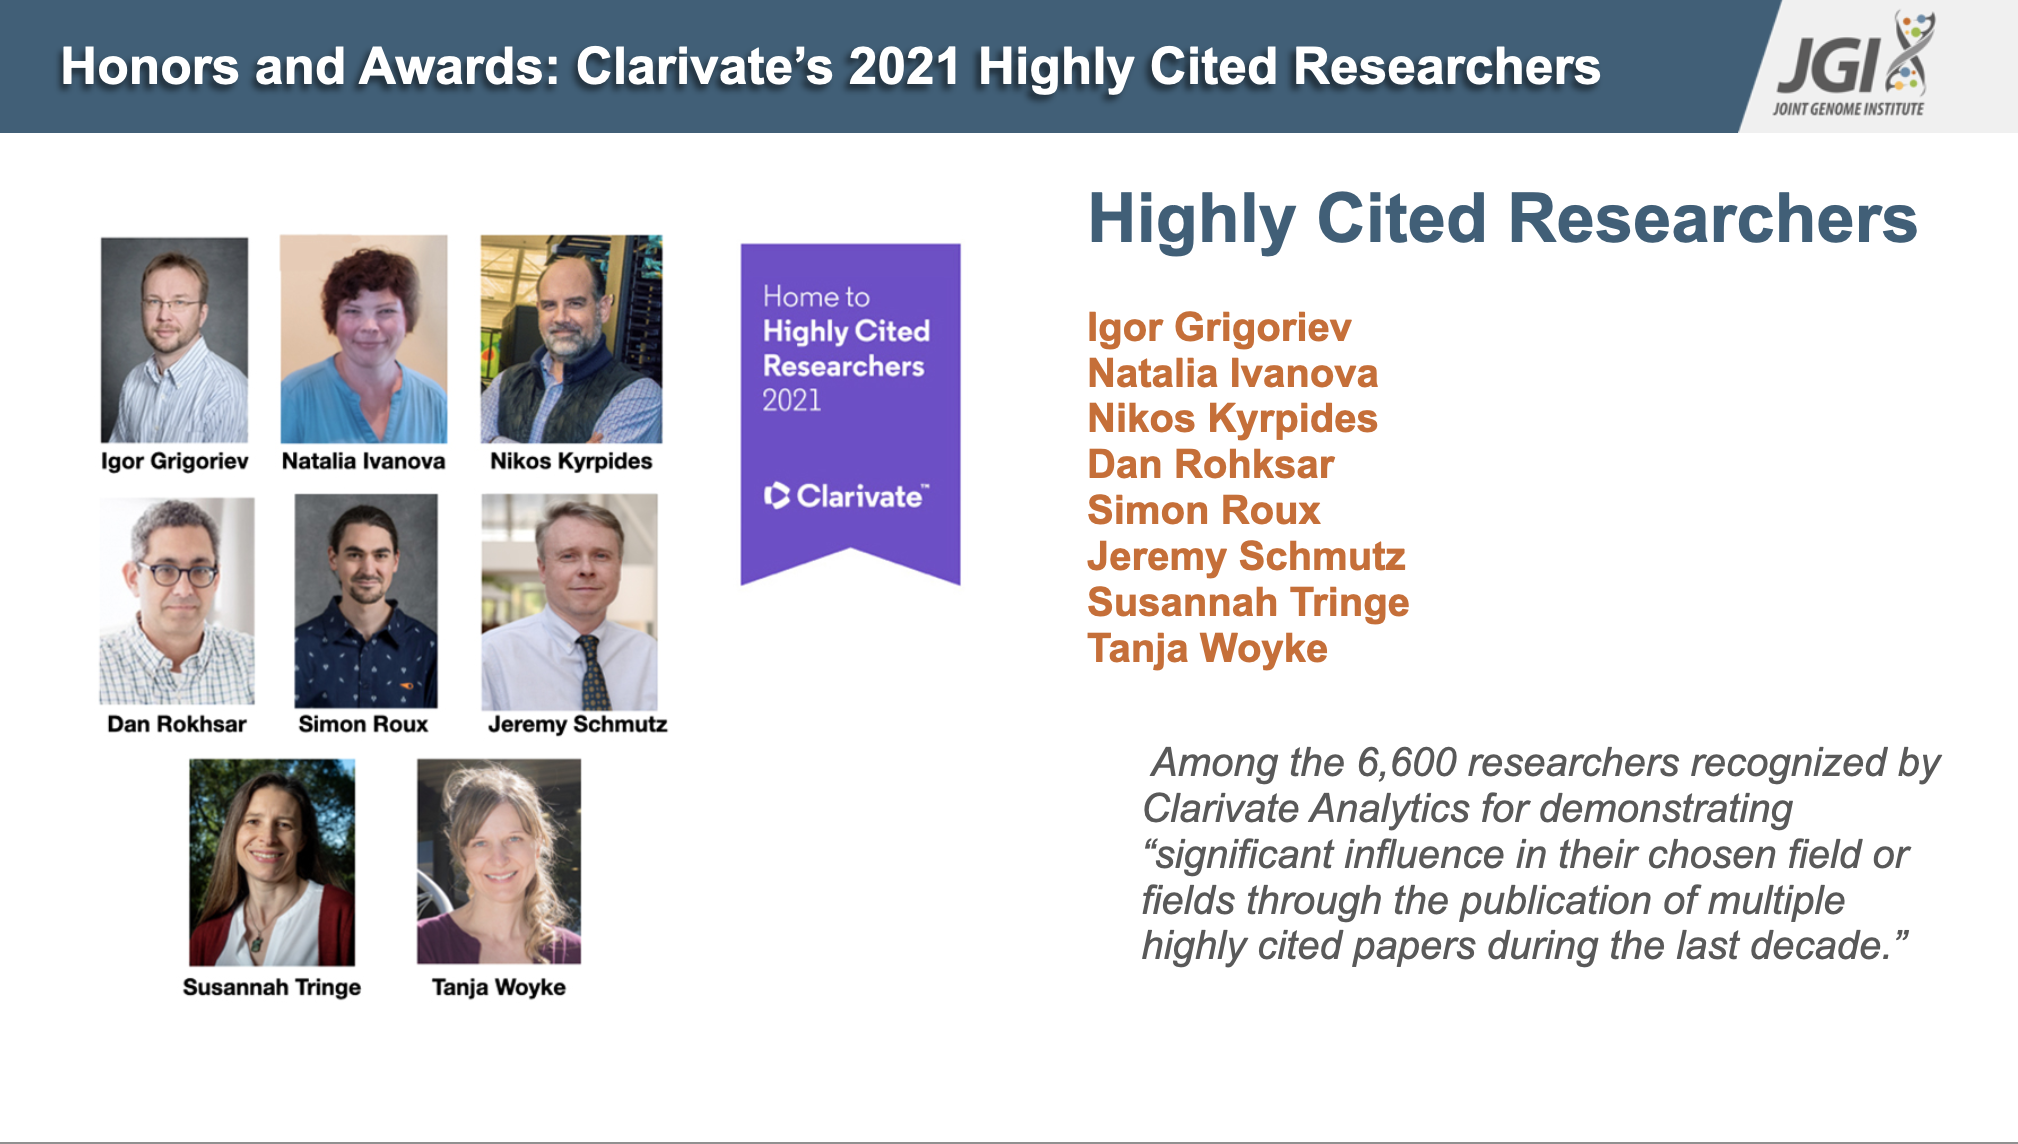 Clarivate's 2021 highly cited researchers